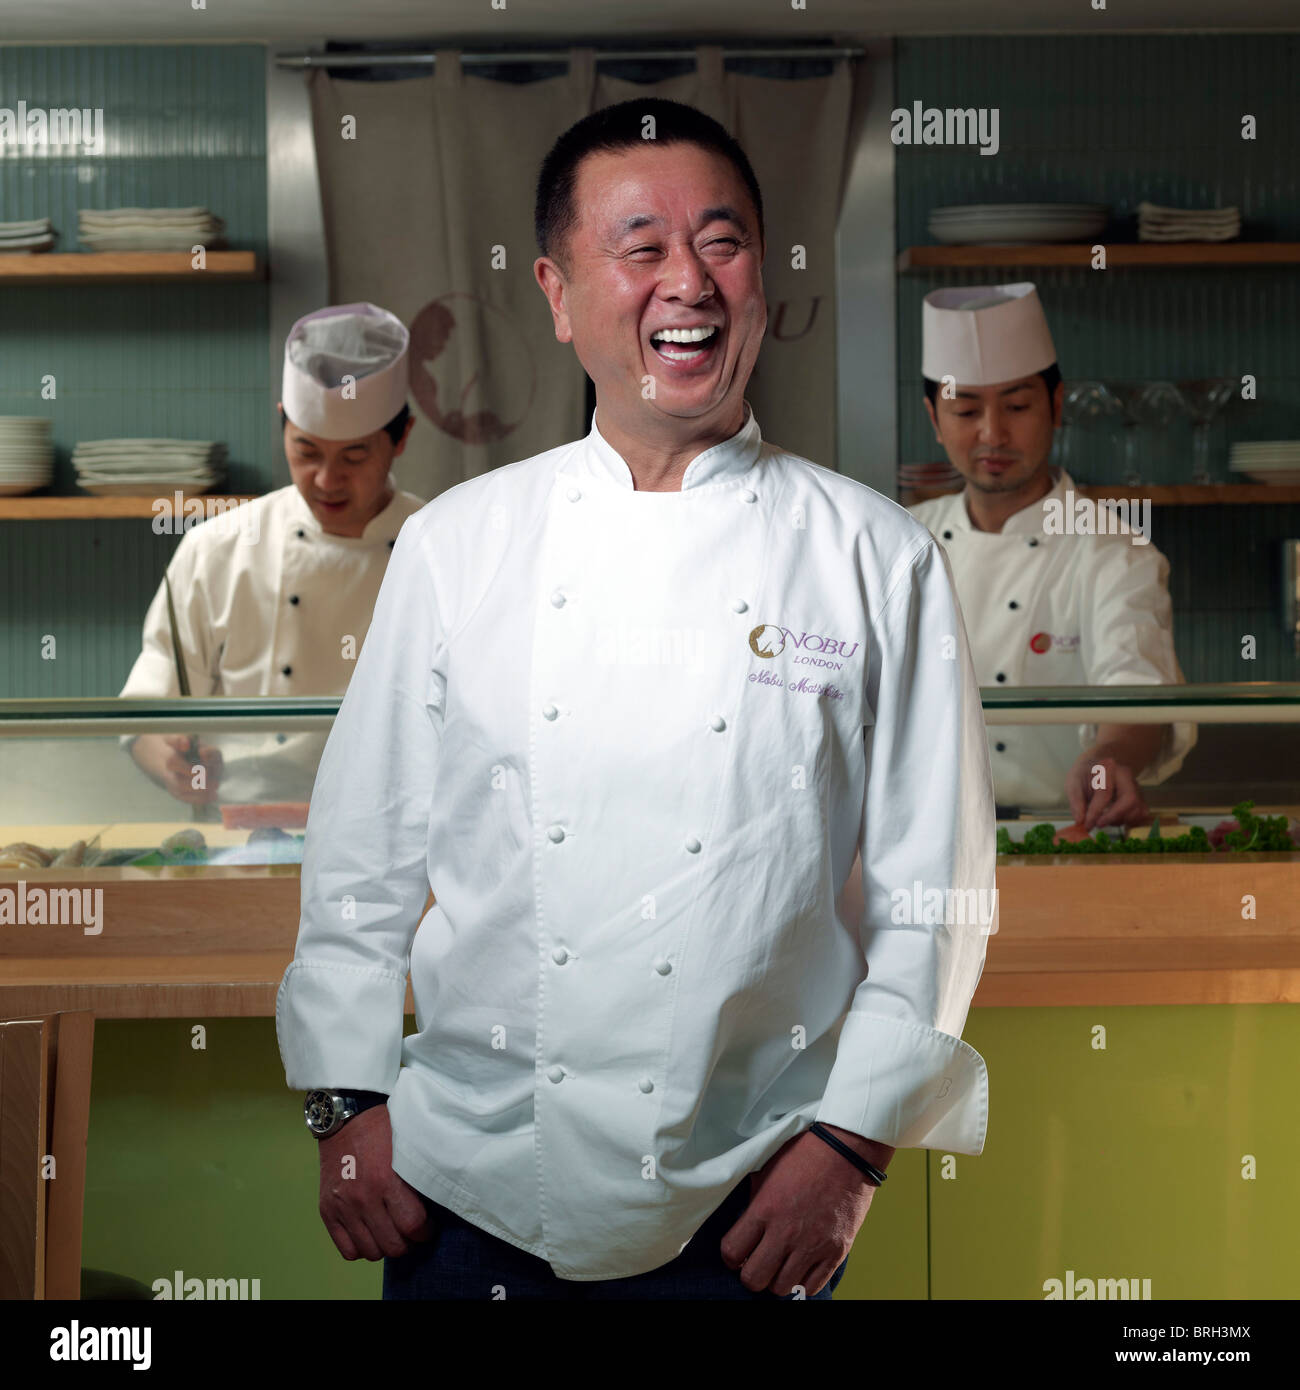 Albums 98+ Images celebrity chef matsuhisa, or his restaurant chain Latest